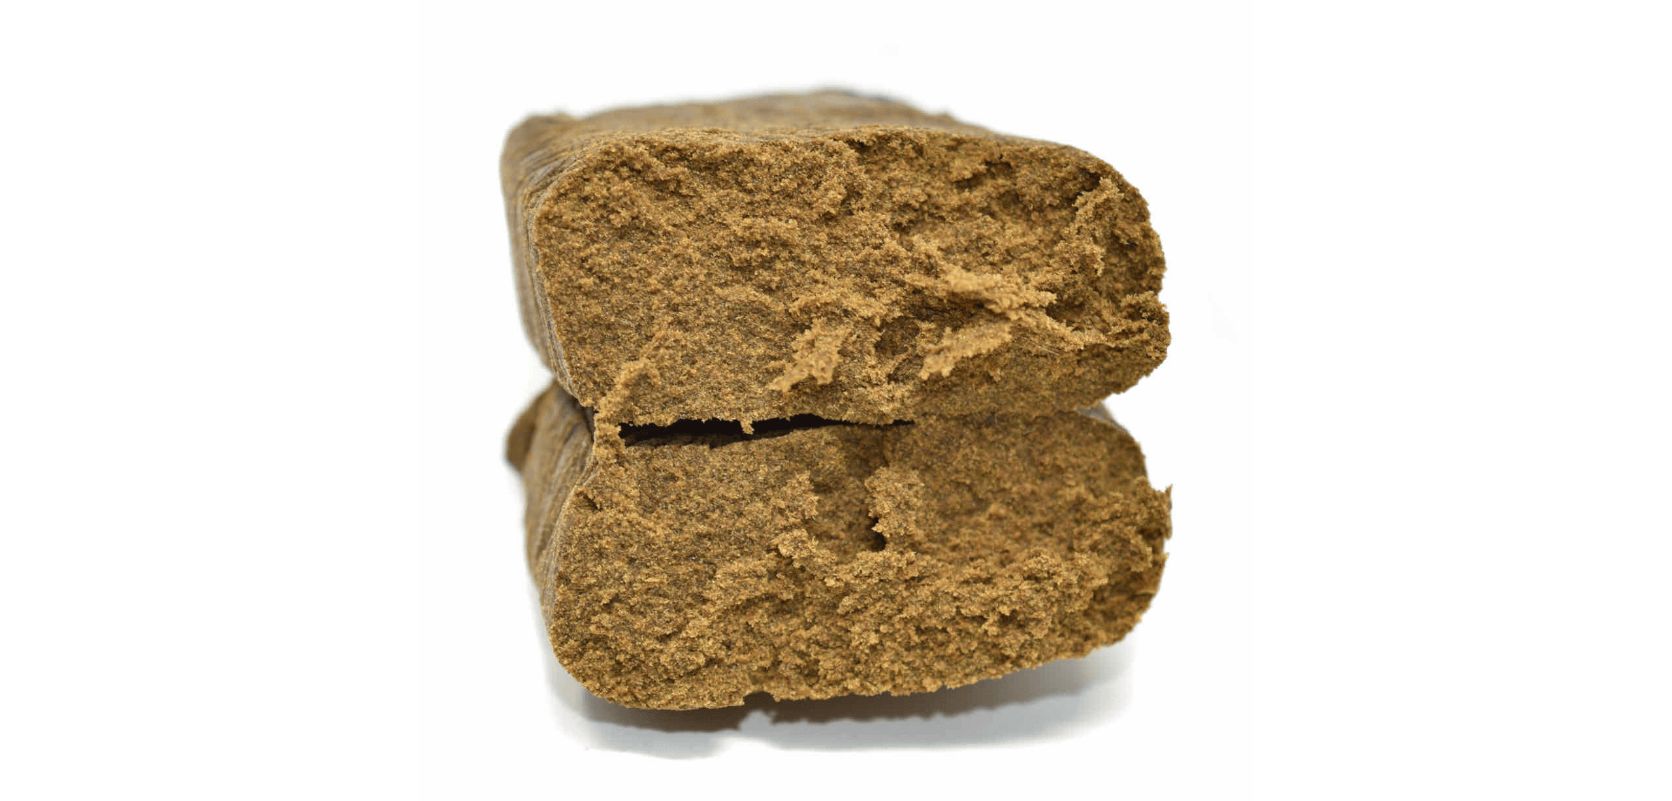 Moroccan hash has a few characteristics that set it apart from other products.